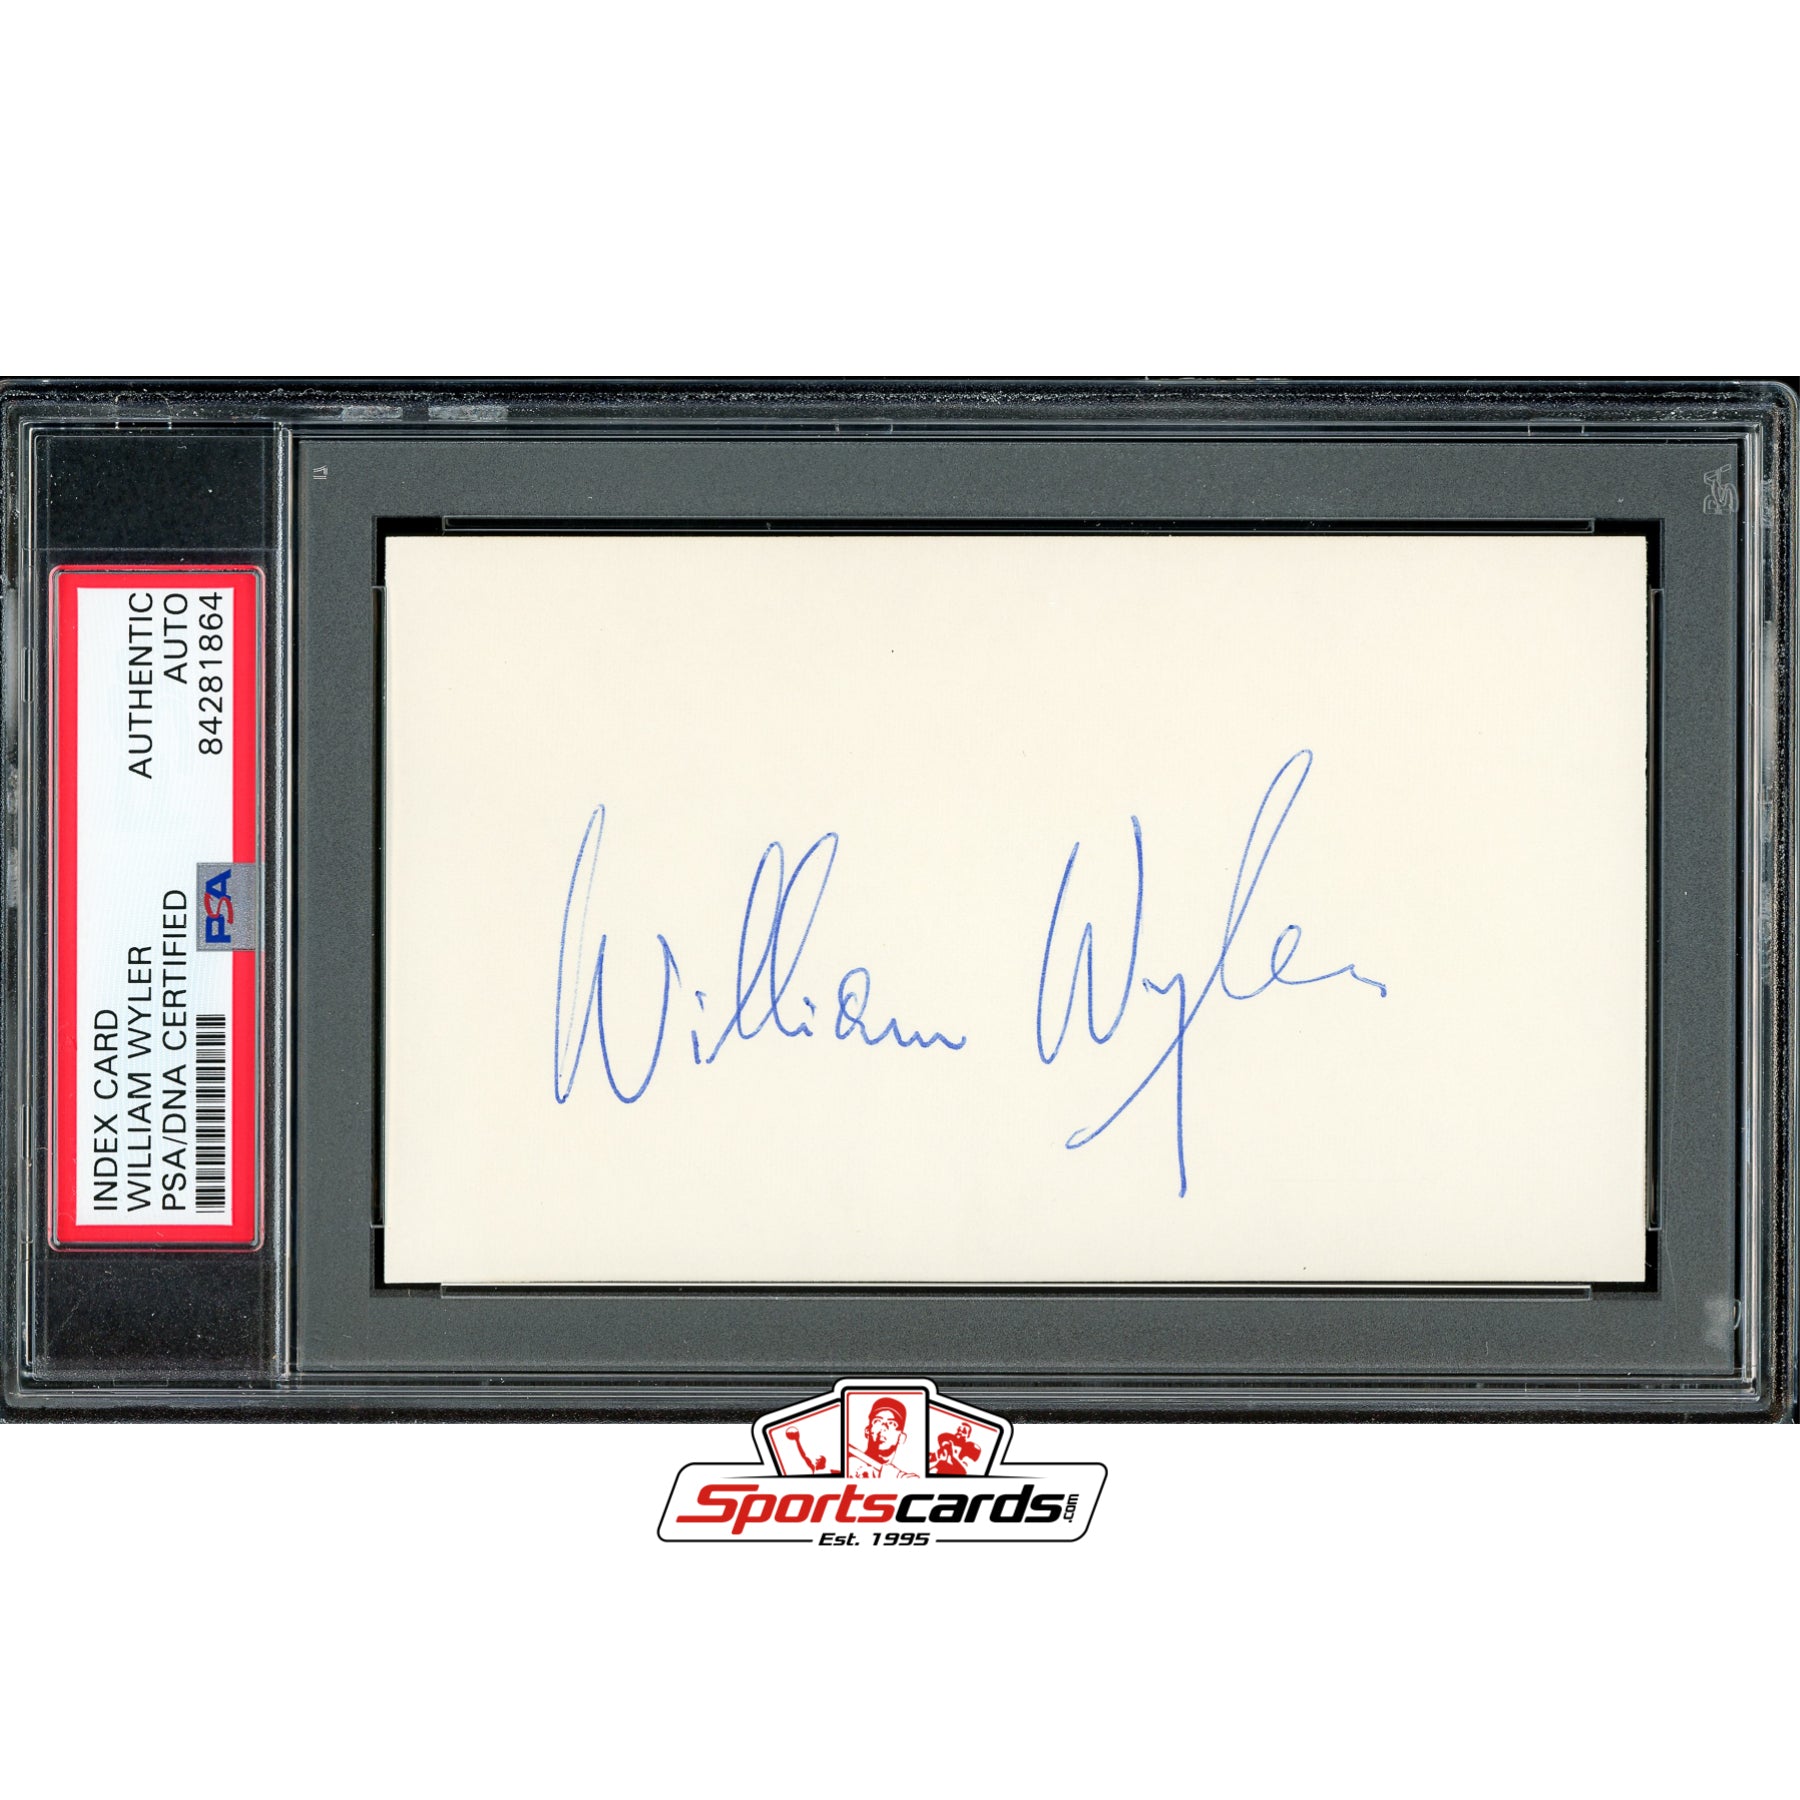 Director William Wyler (d.1981) Signed 3x5 Index Card Autograph PSA/DNA